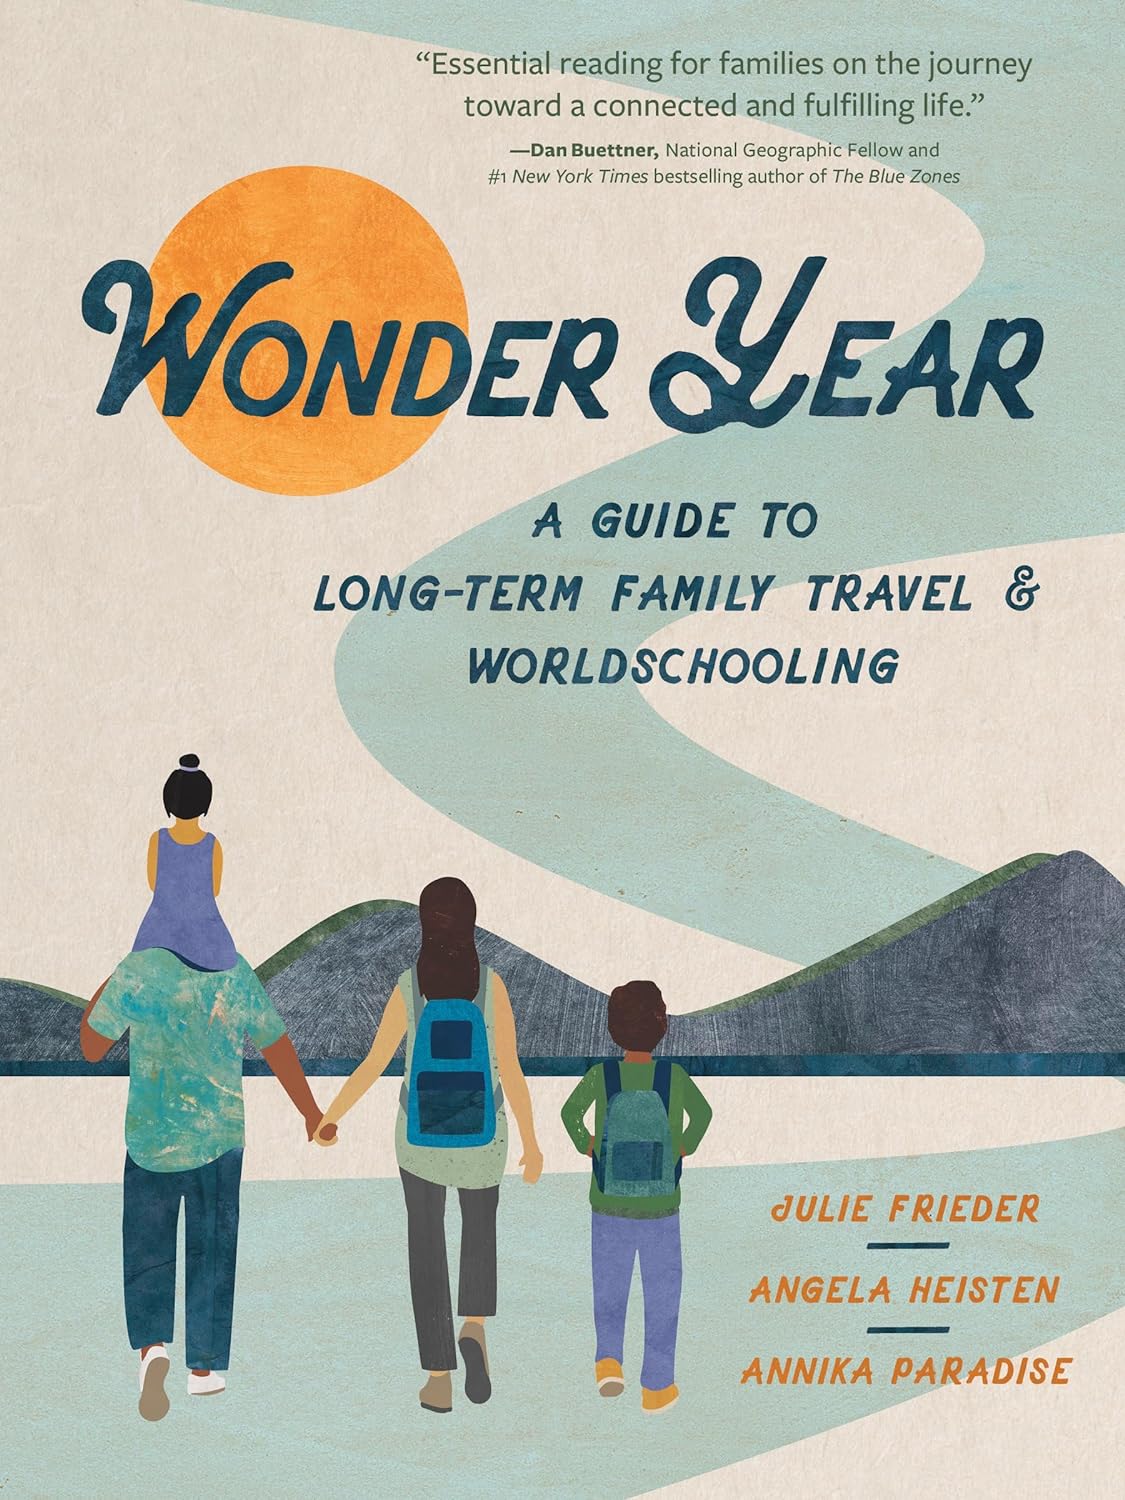 Wonder Year: A Guide to Long-Term Family Travel and Worldschooling